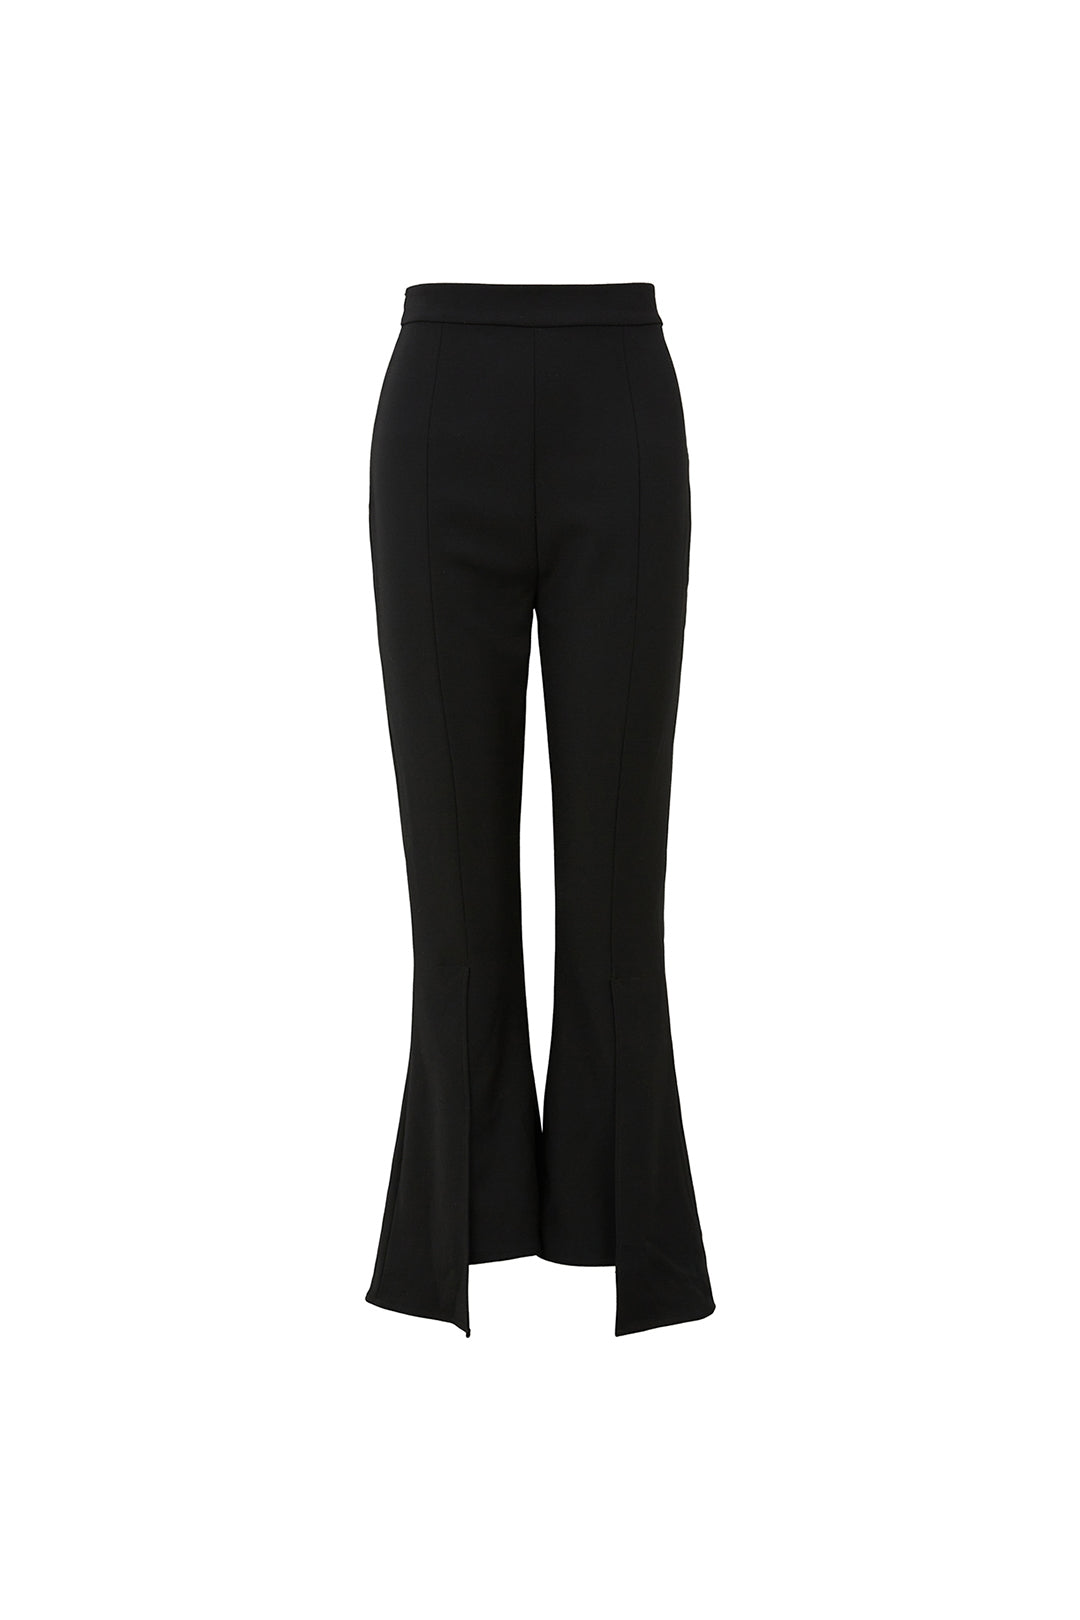 High Waist Knitted Flared Pants For Women Elegant White And Black Hollow  Out Long Flared Trousers Women With Casual Hiver Style 211006 From Kong01,  $18.42